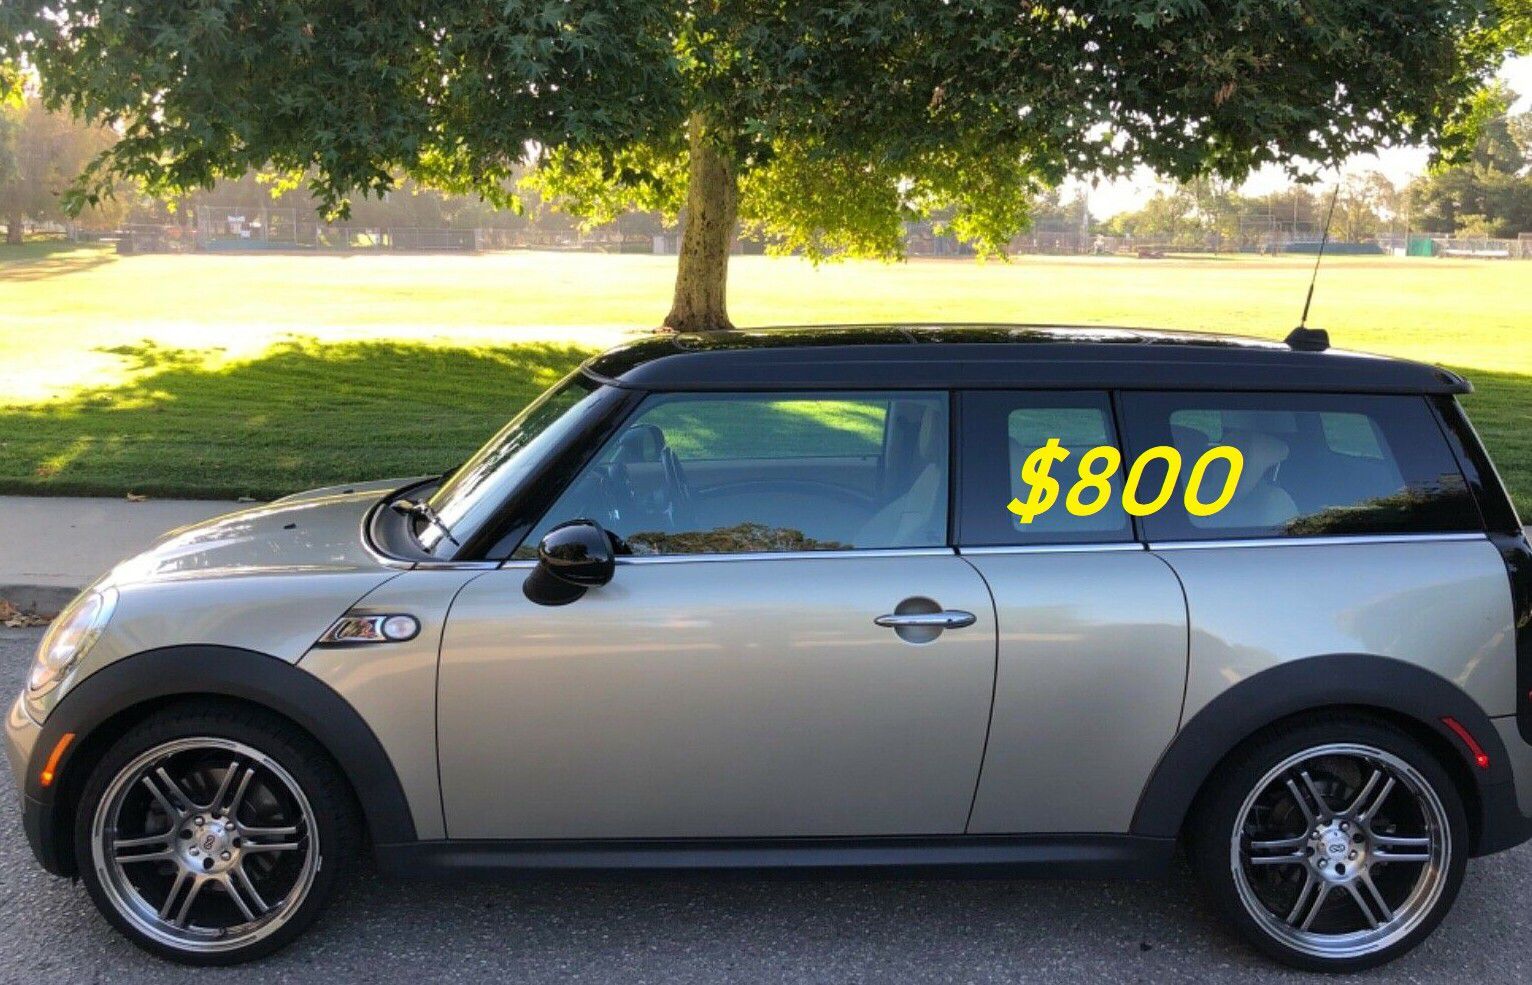 🎁💲8OO For sale URGENTLY 2OO9 Mini cooper . The car has been maintained regularly 🎁c